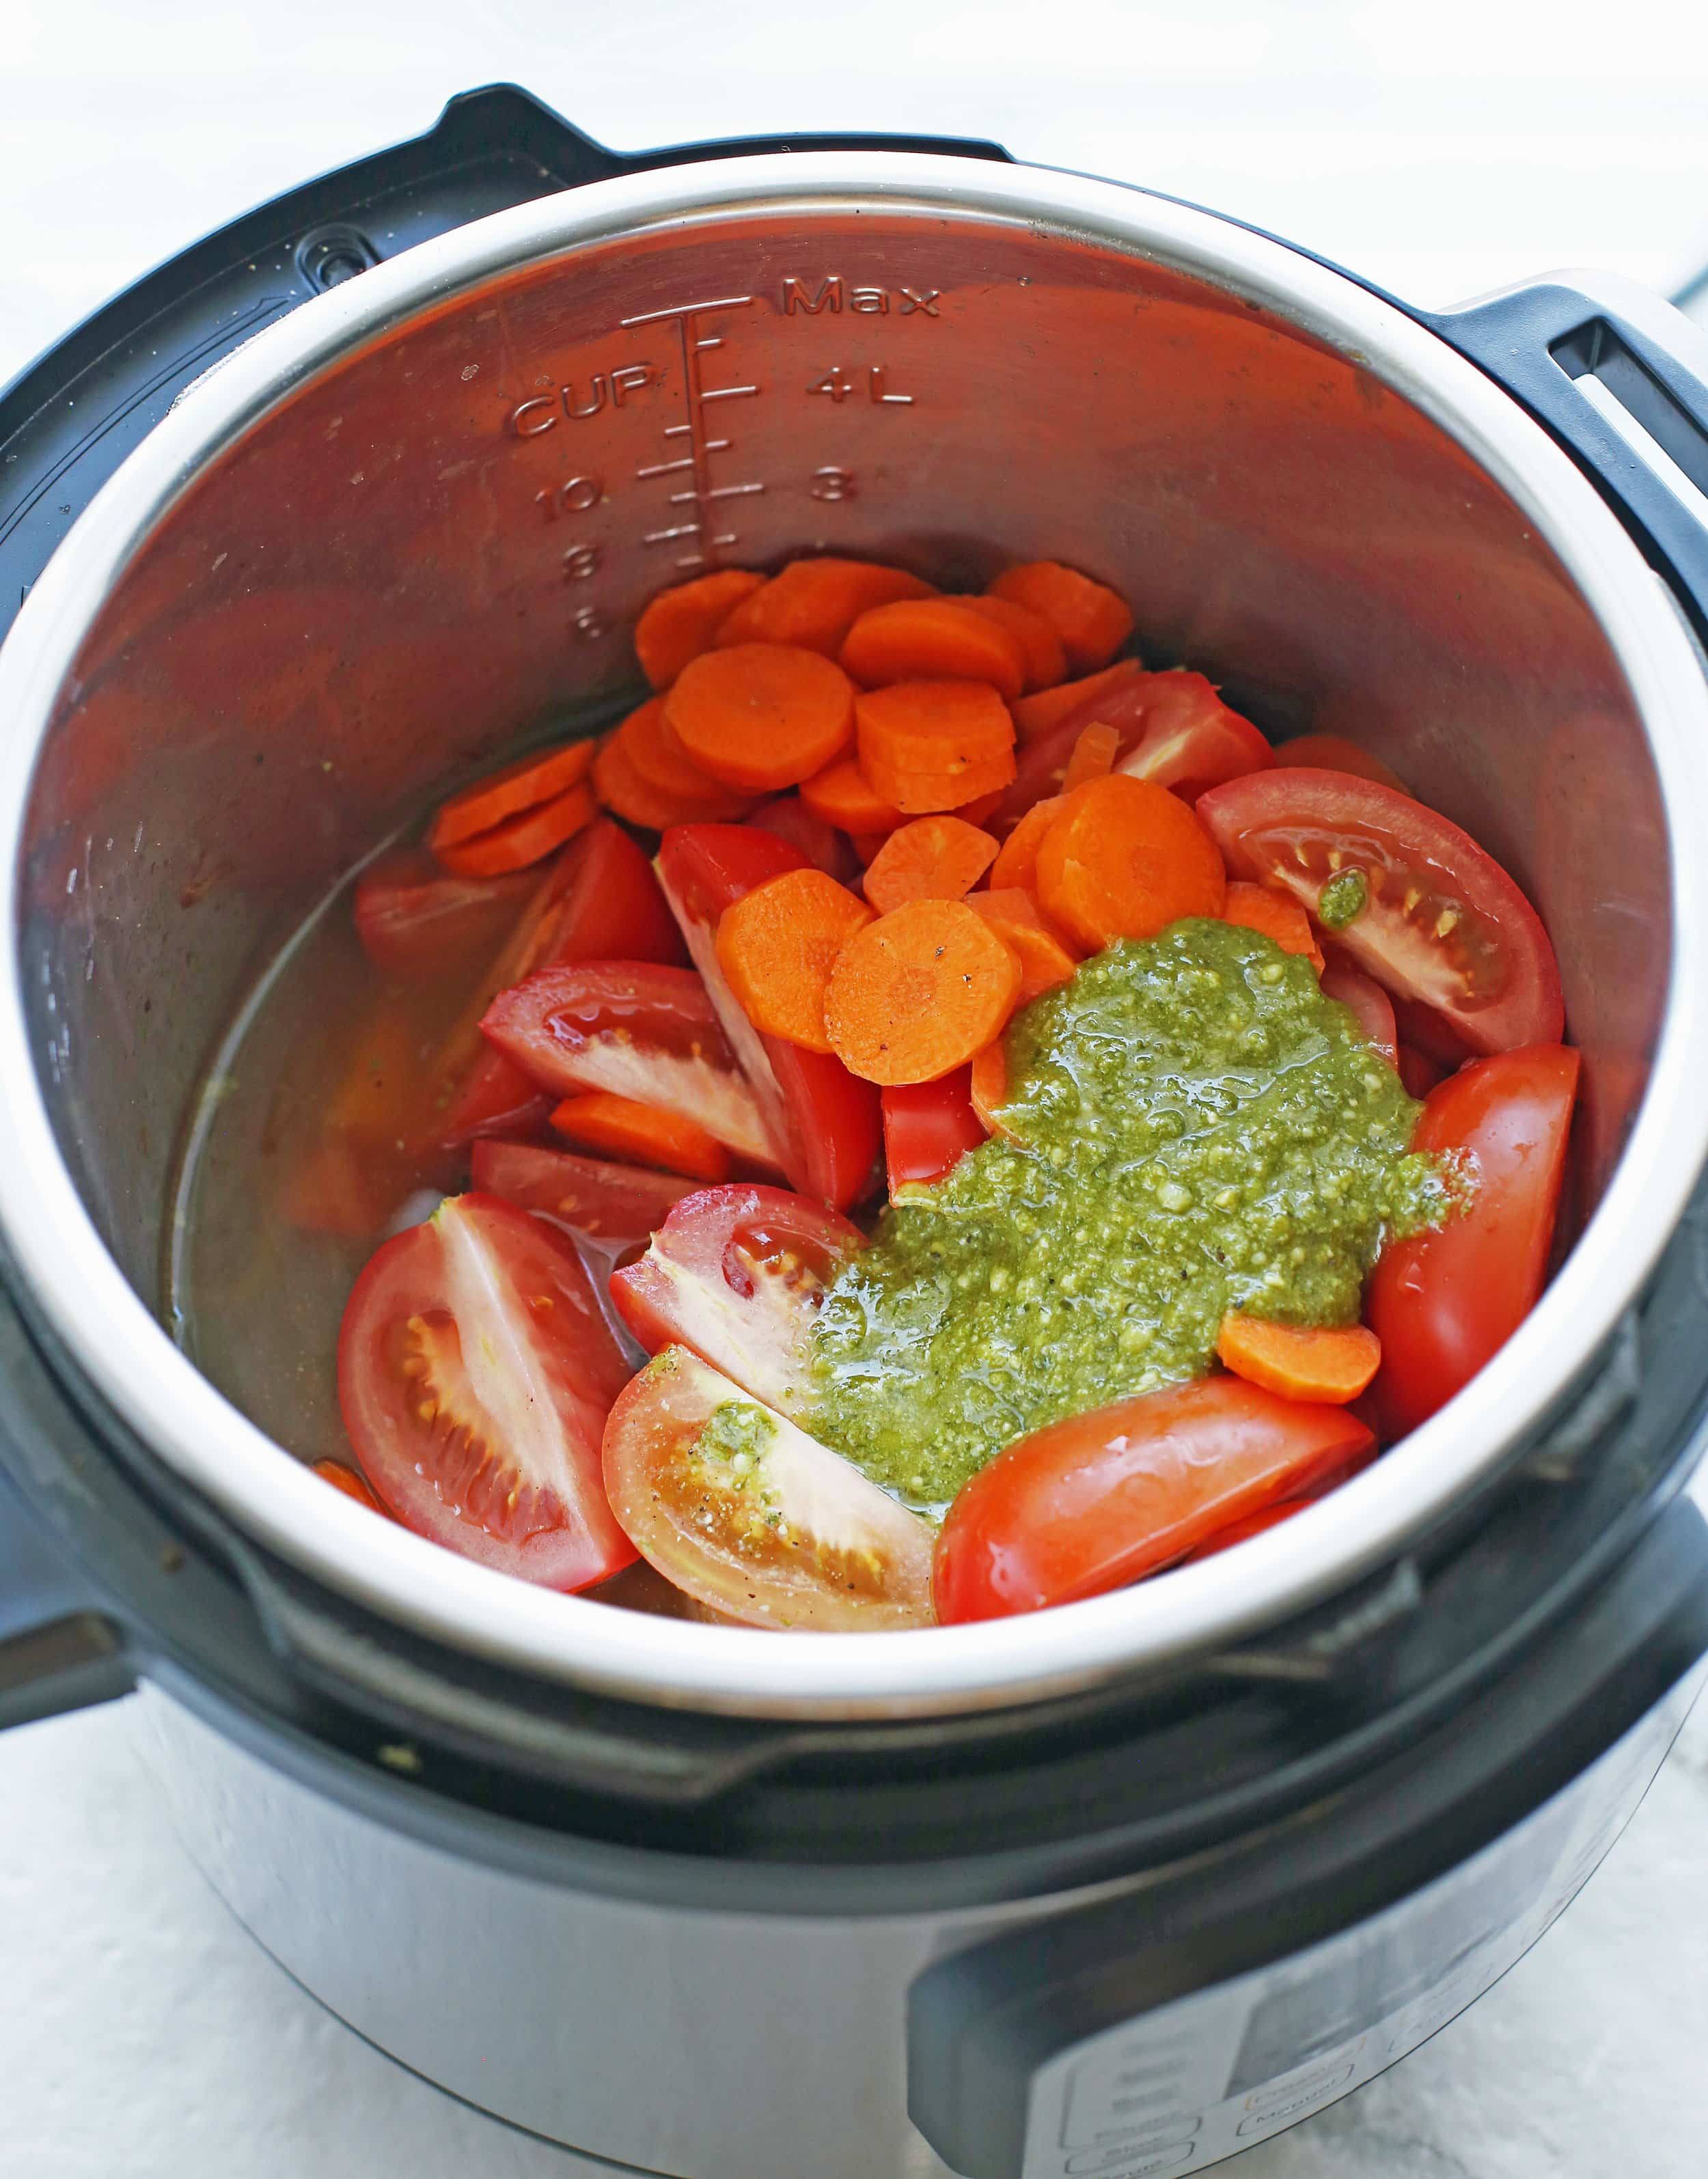 Onions, tomatoes, pesto, carrots, broth, and seasoning in the Instant Pot.